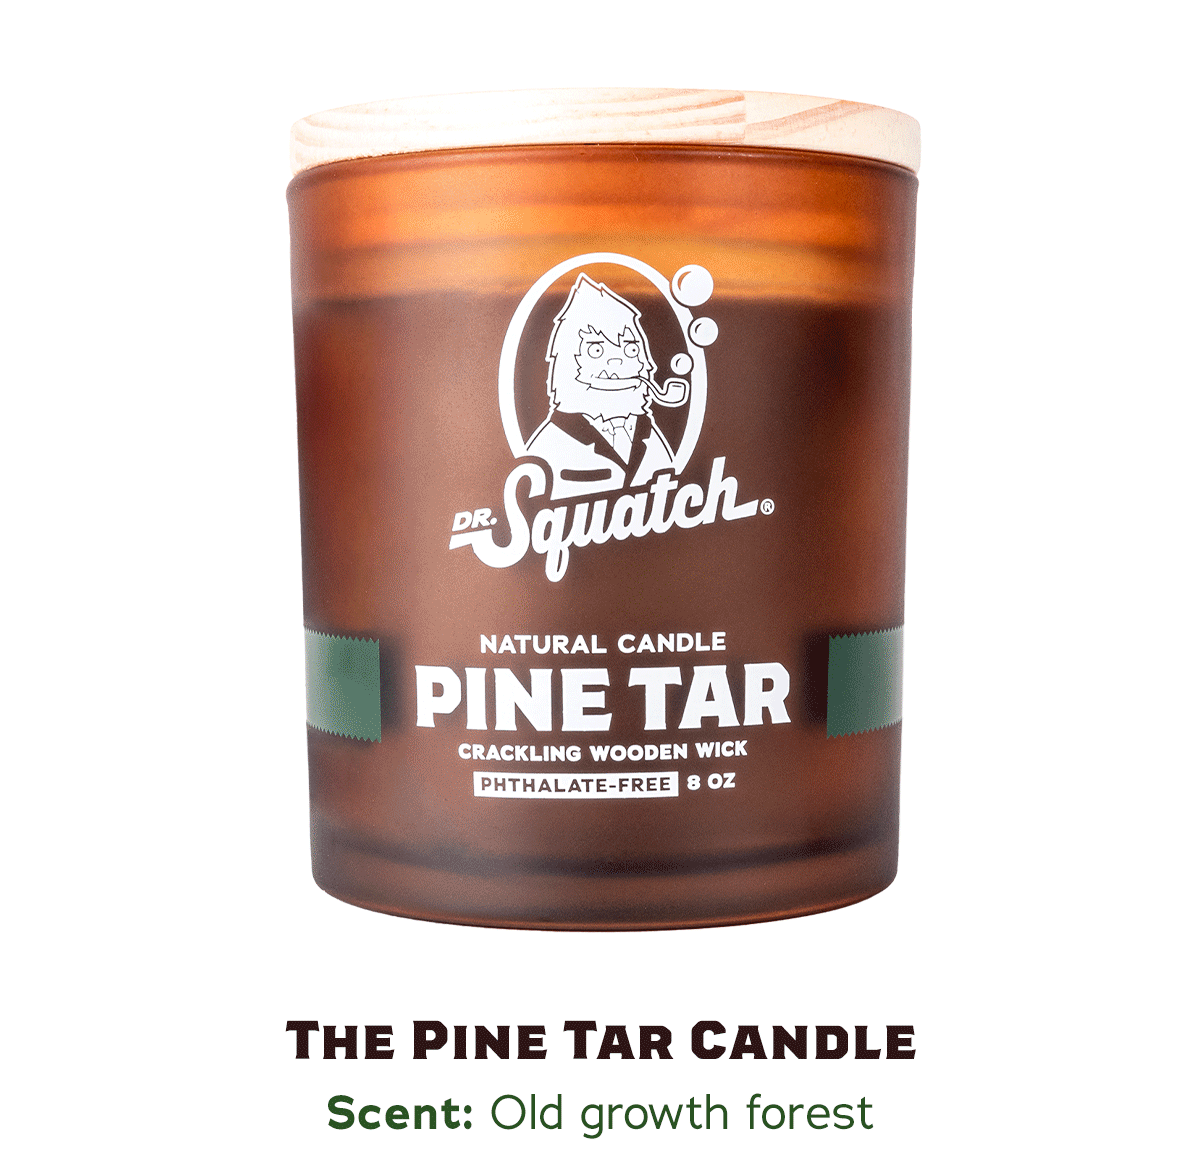 Dr. Squatch Pine Tar Natural Candle Crackling Wooden Wick 8 oz